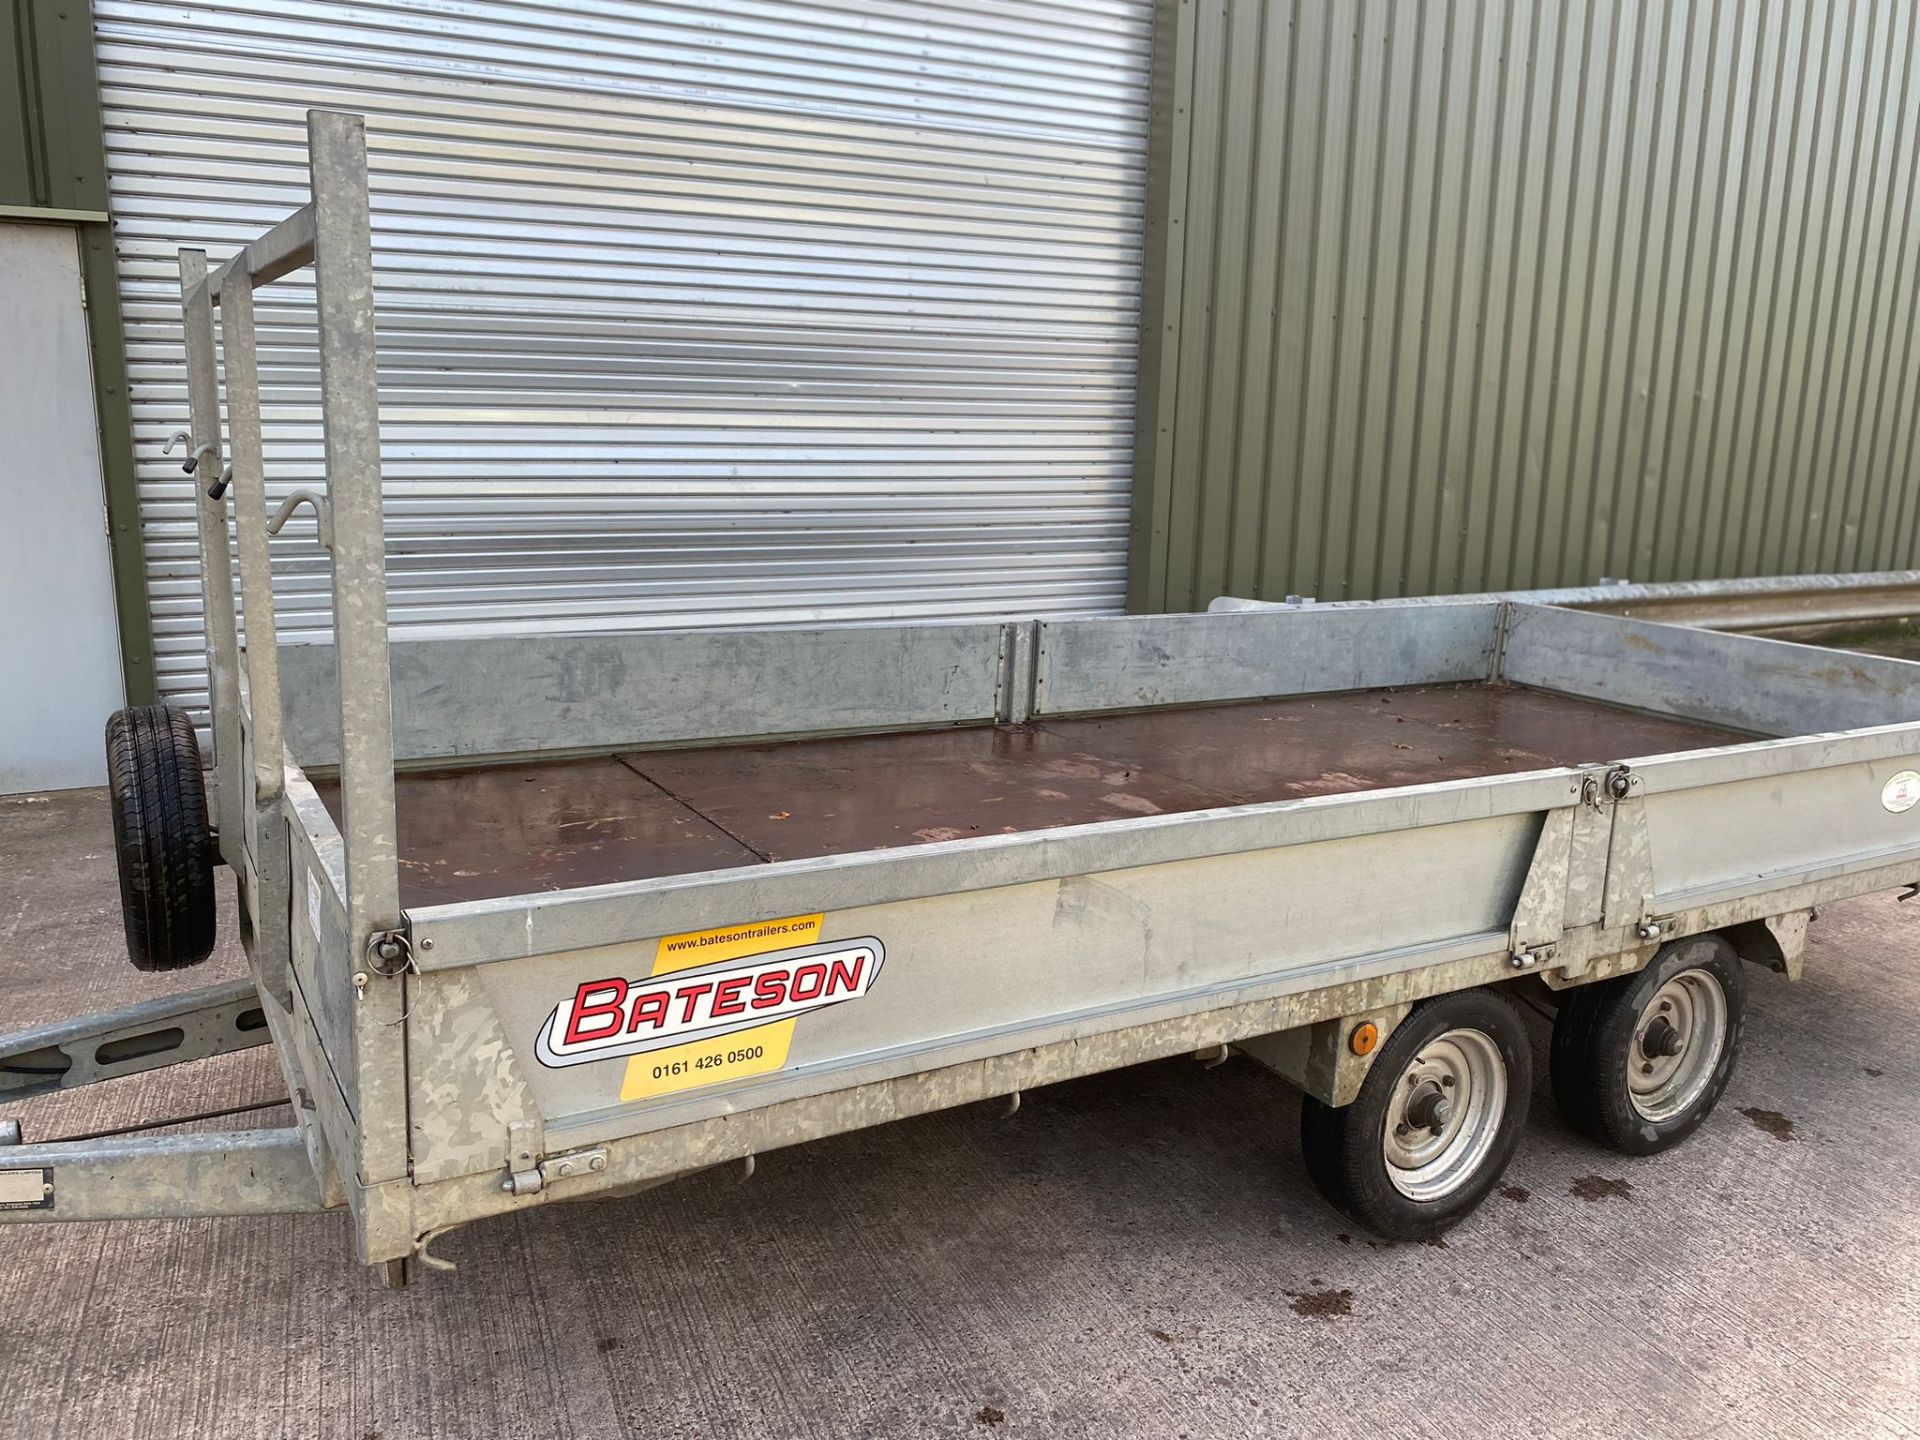 2007 BATESON TRAILER - IN VERY GOOD CONDITION WITH RAMPS, BRAKES ALL WORK, LIGHTS ALL WORK - Image 5 of 11